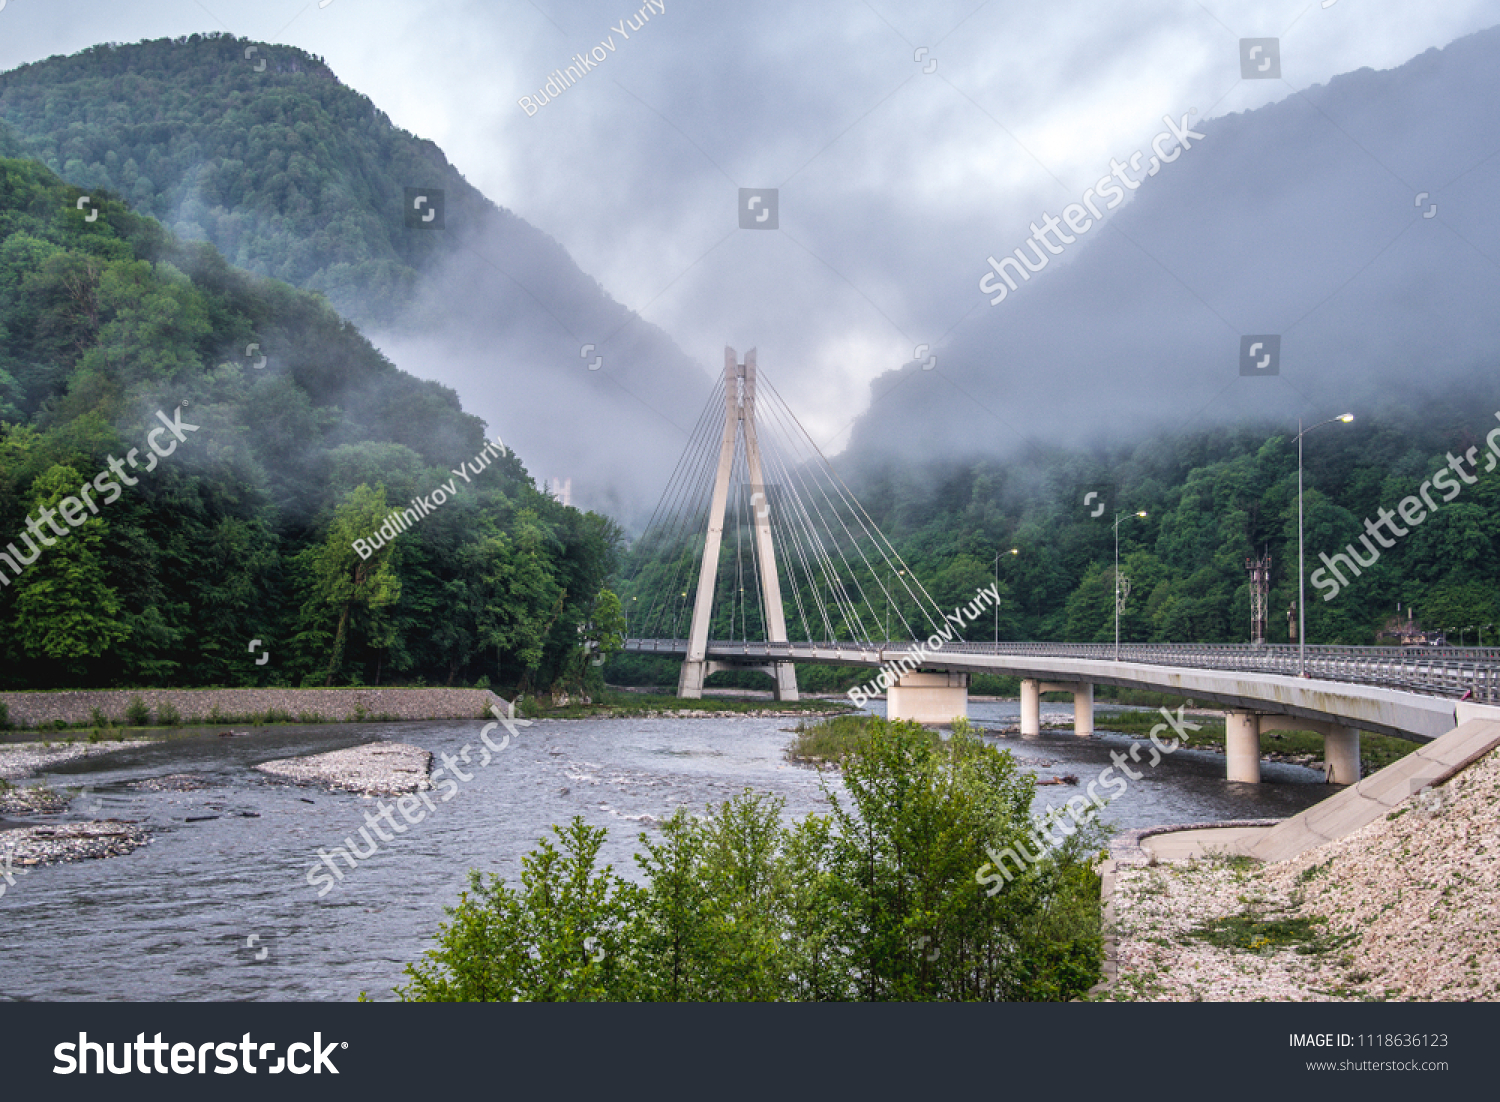 Bridge in the mountains with interesting supports. Engineering solution #1118636123